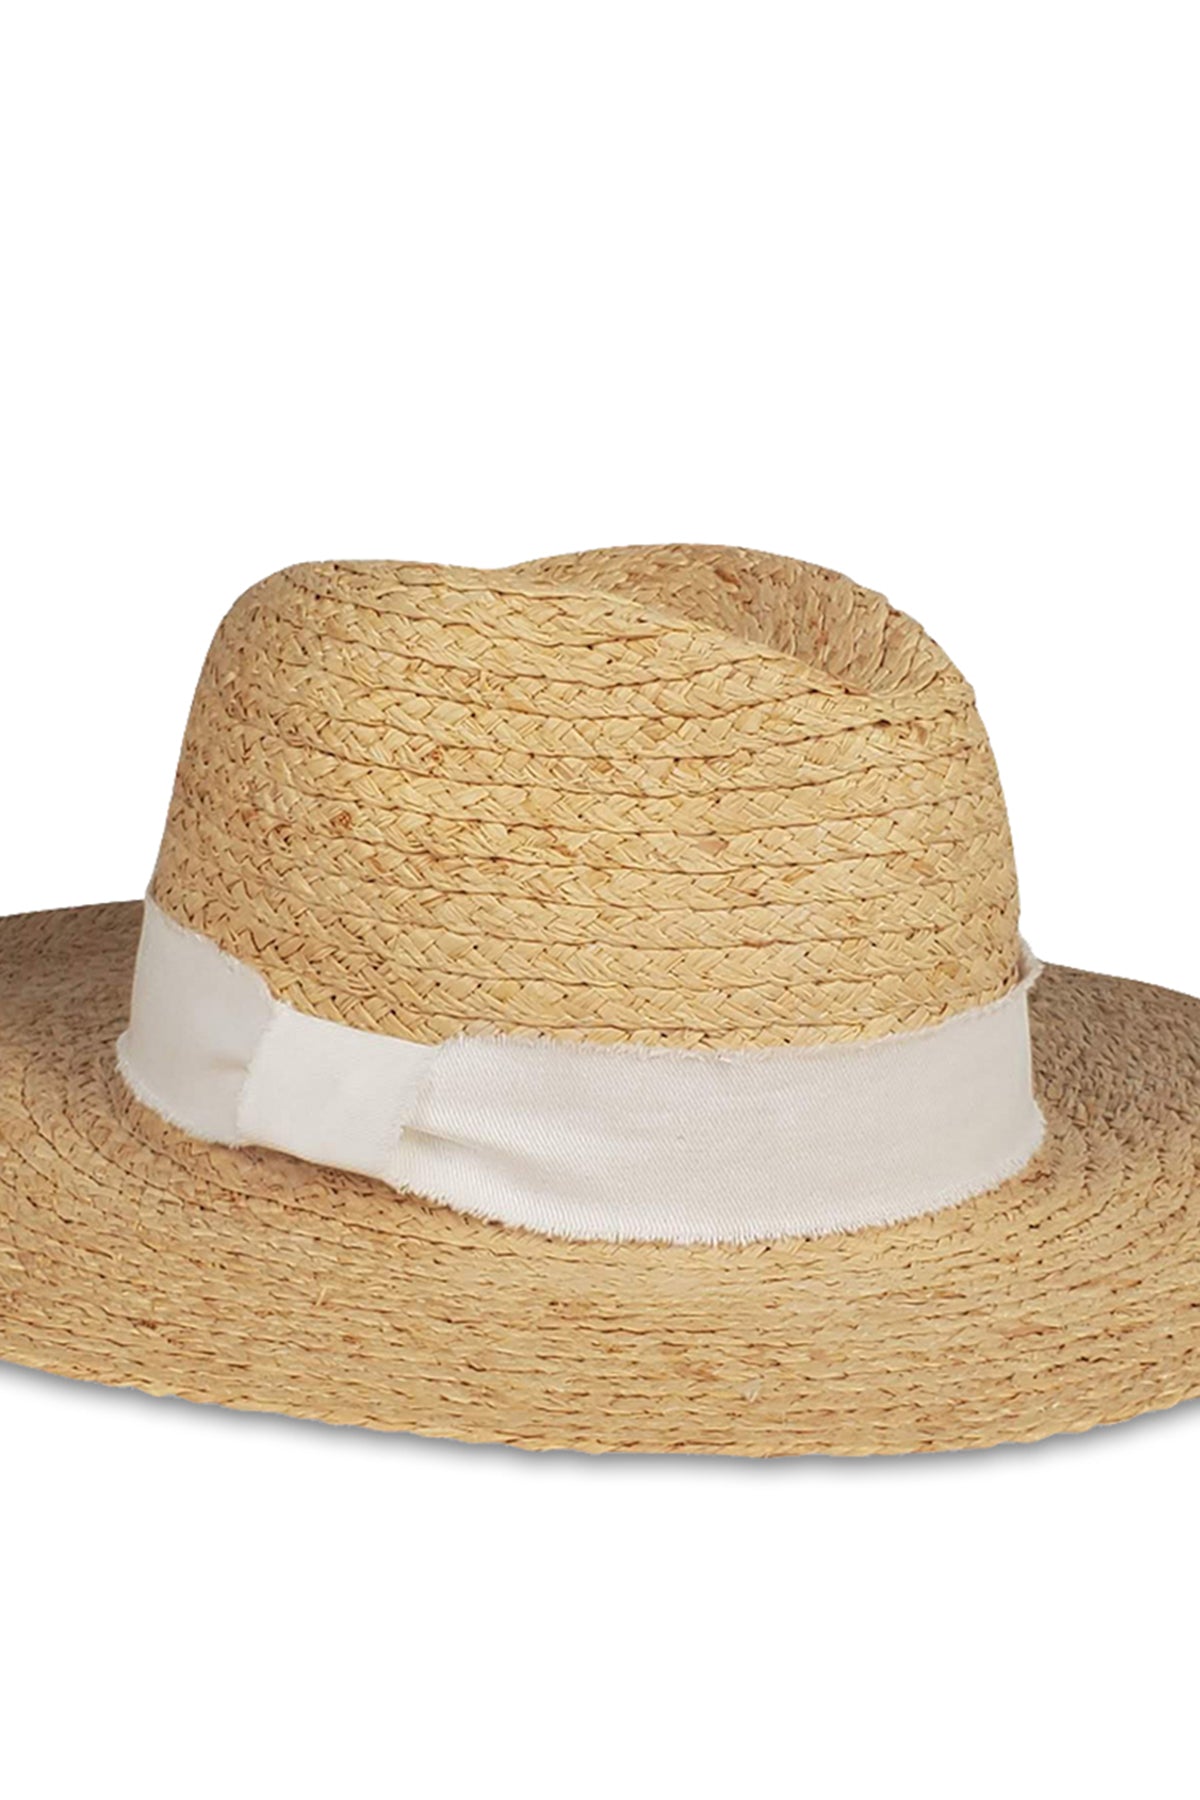 Day to Day Continental Hat Natural with White Detail-17958577111233